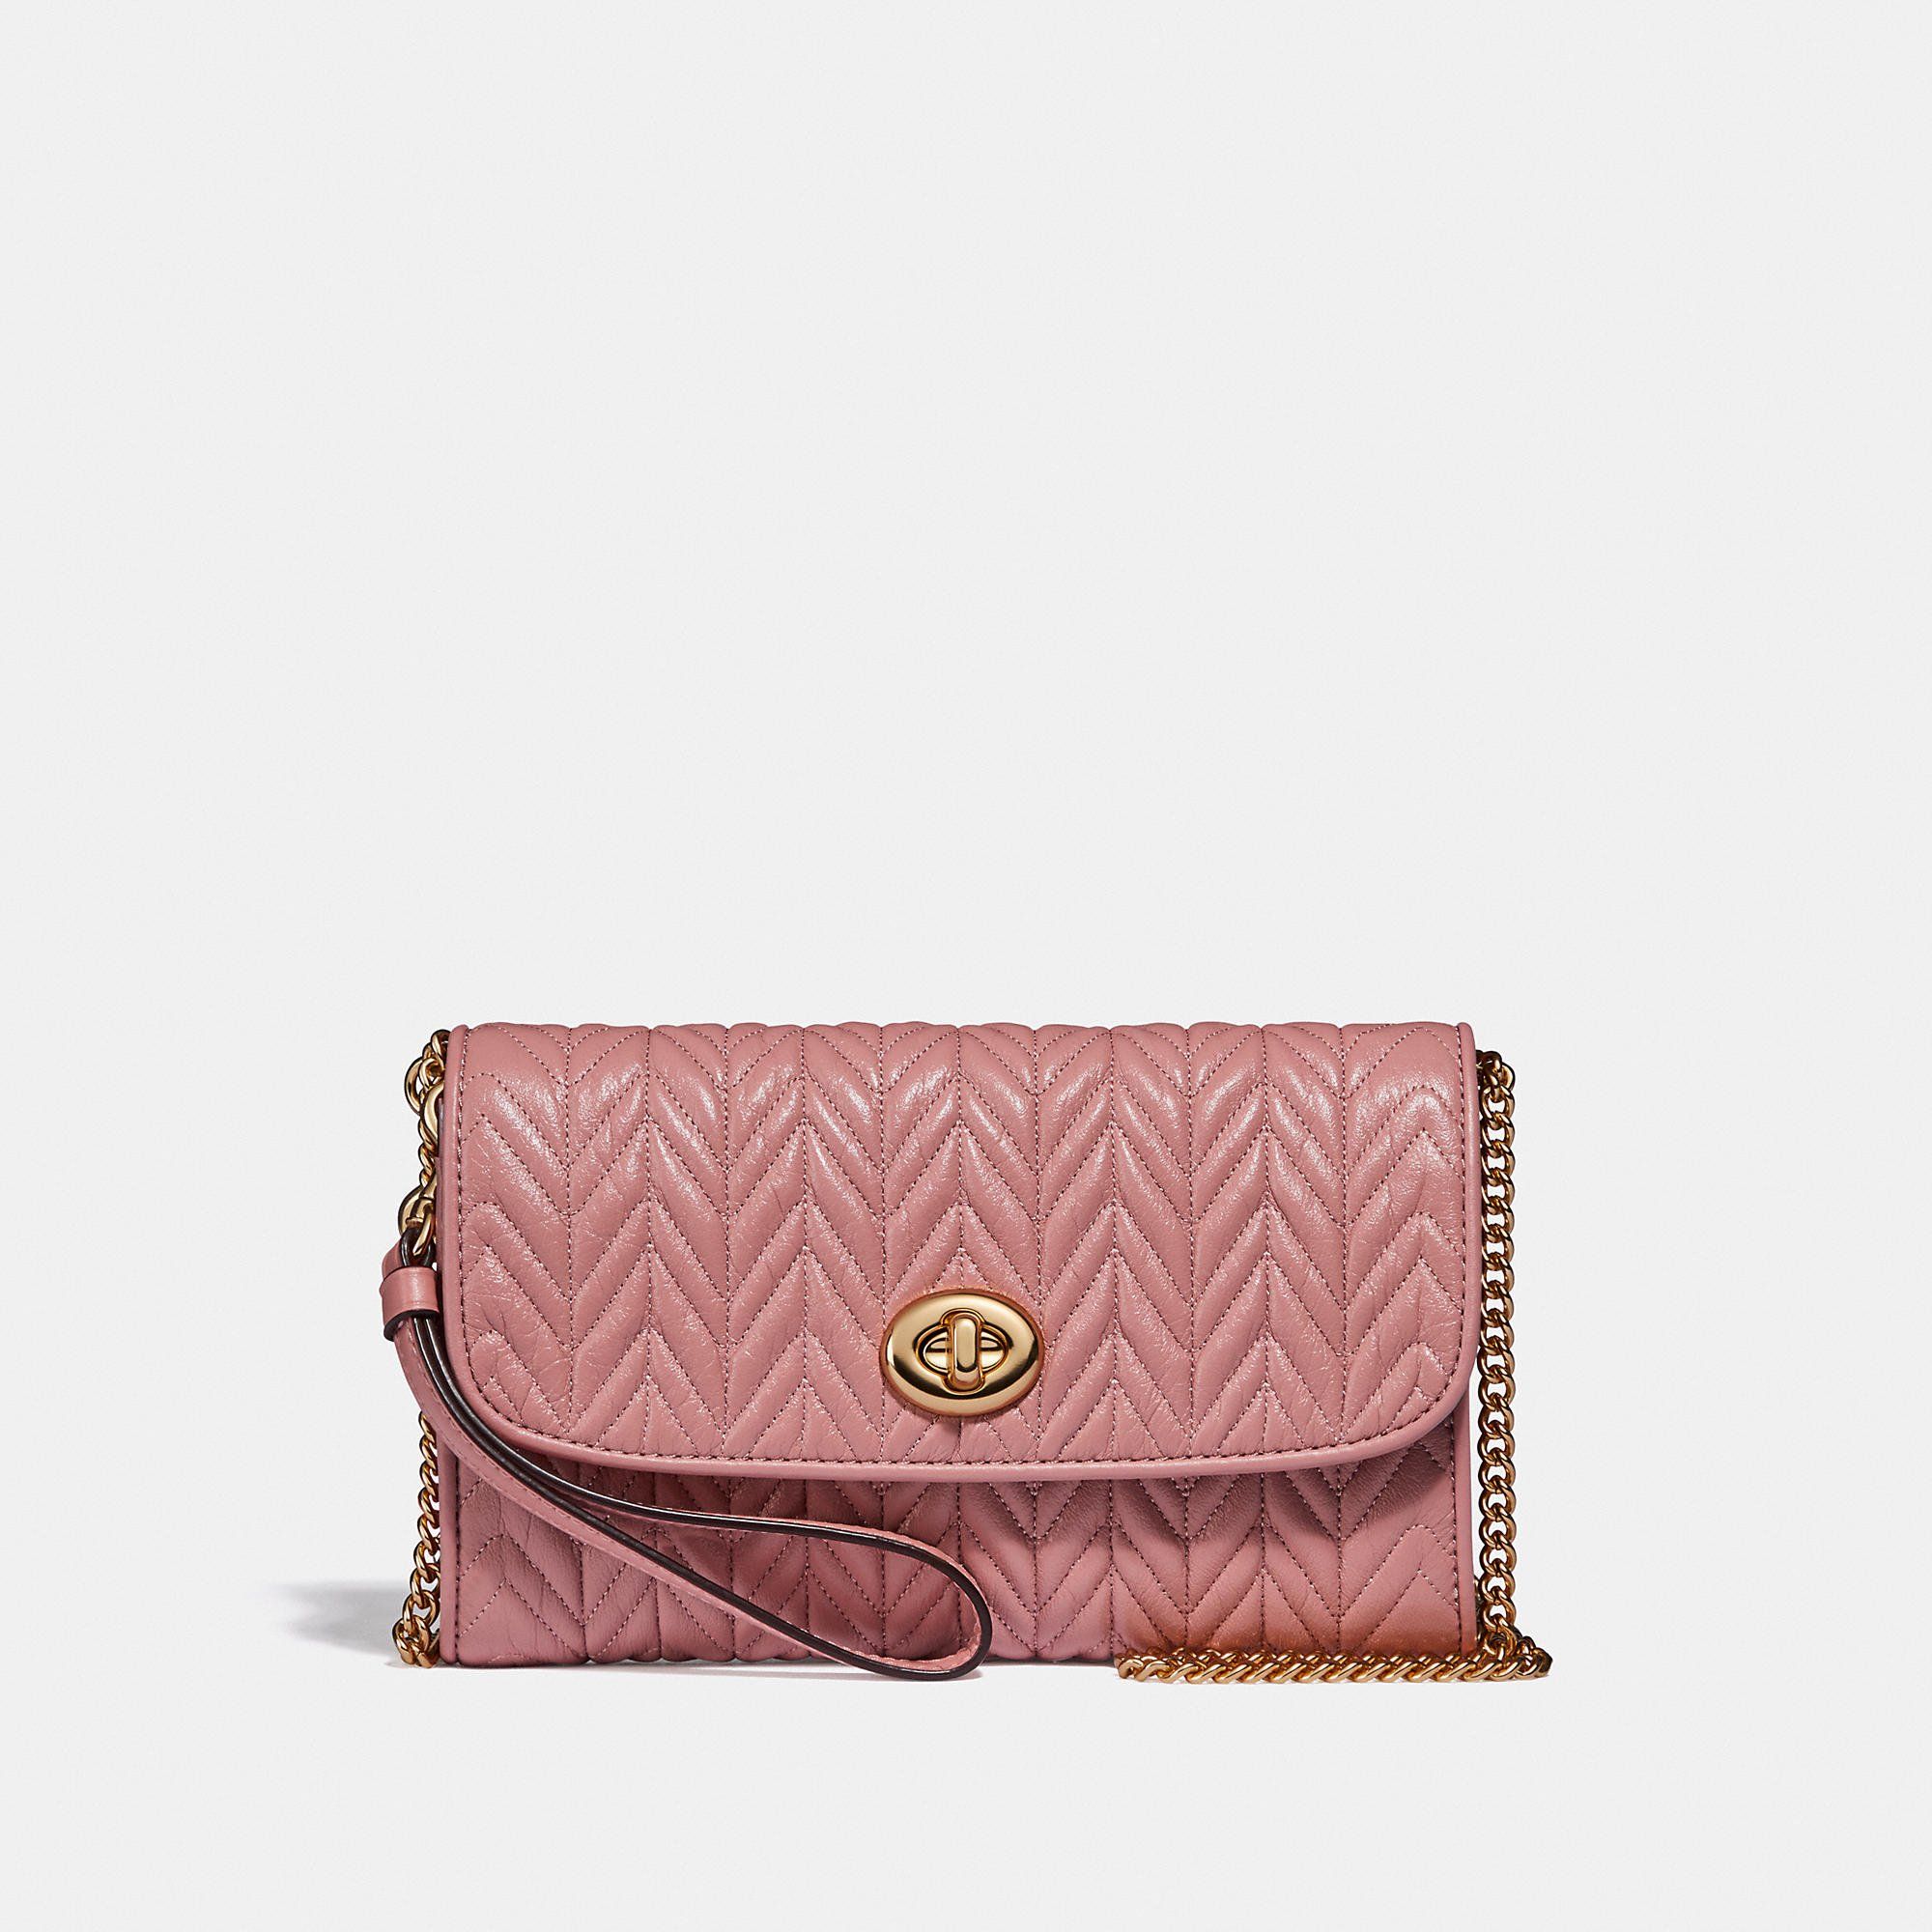  Coach Chain Crossbody With Quilting - Pink Petal 